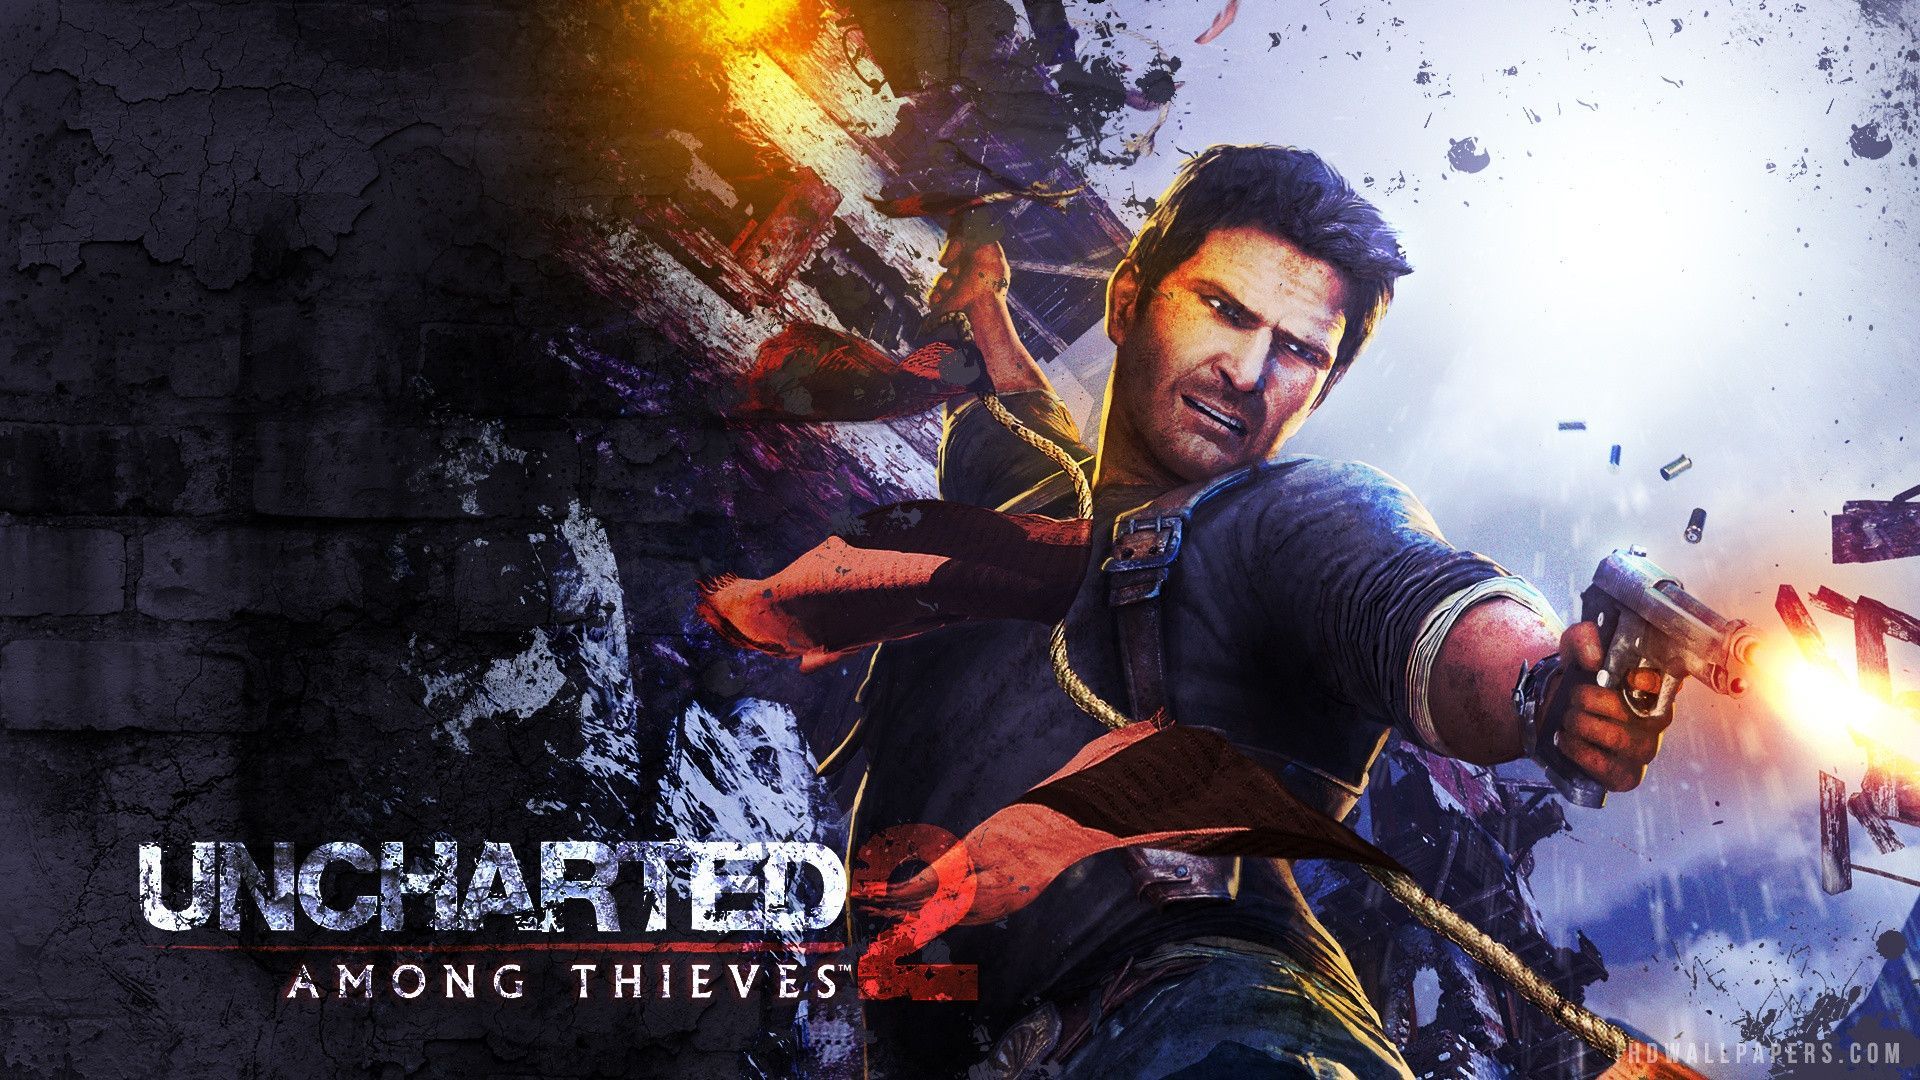 High Resolution Wallpaper | Uncharted 2: Among Thieves 1920x1080 px